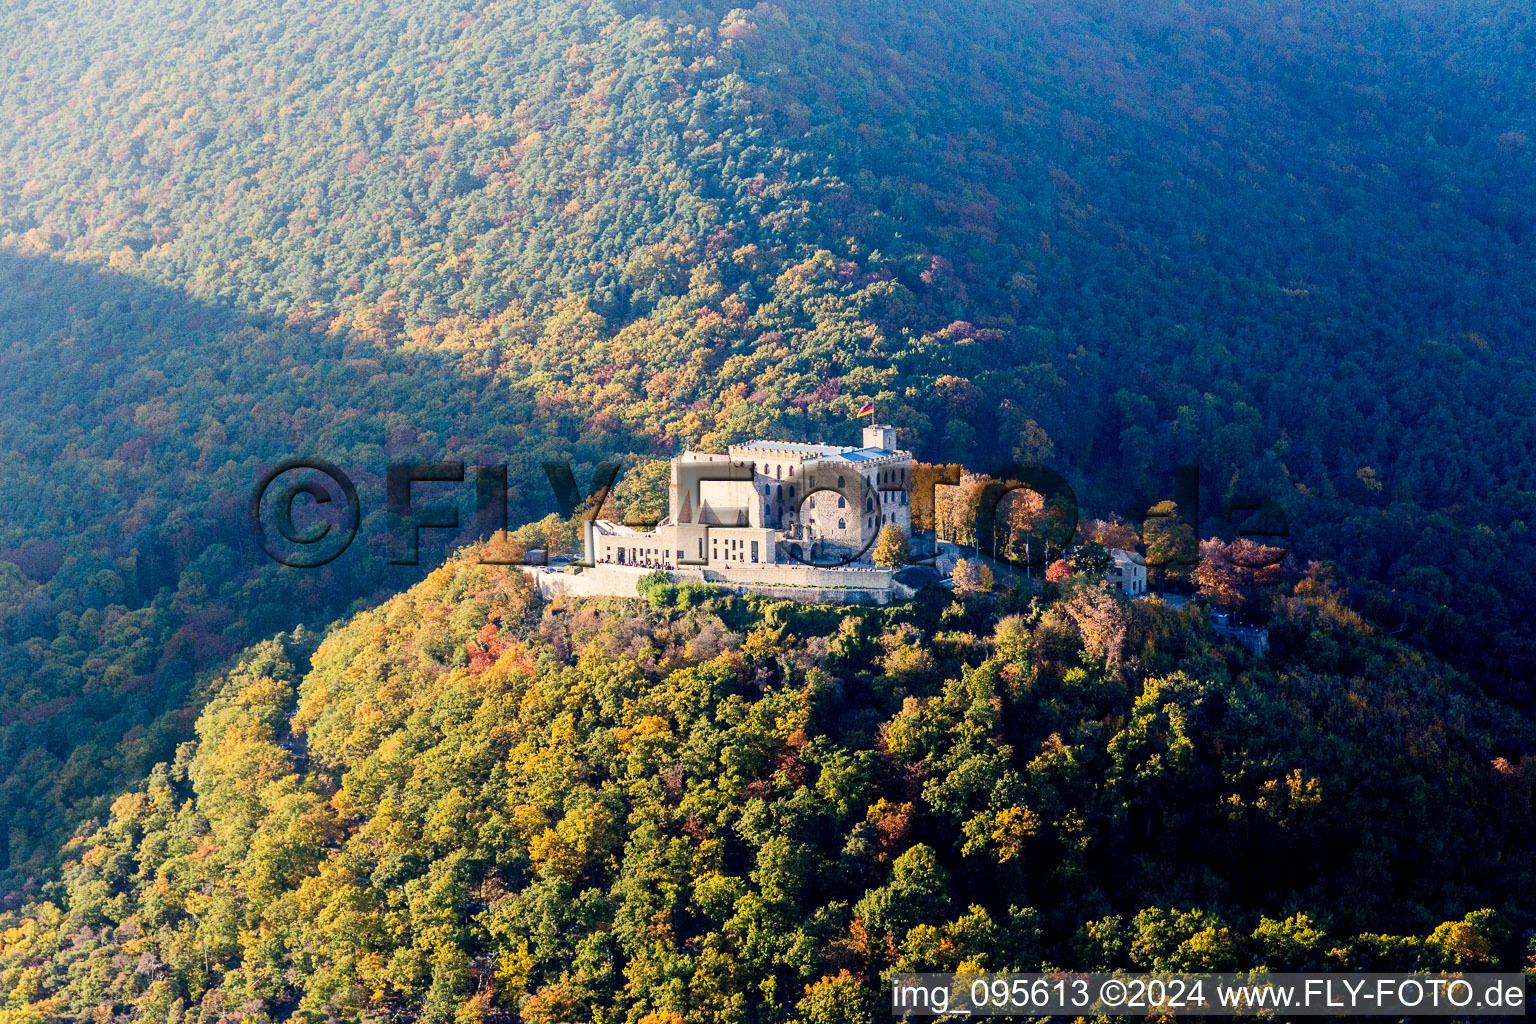 Aerial photograpy of Castle of Schloss Hambacher Schloss in the district Hambach in Neustadt an der Weinstrasse in the state Rhineland-Palatinate